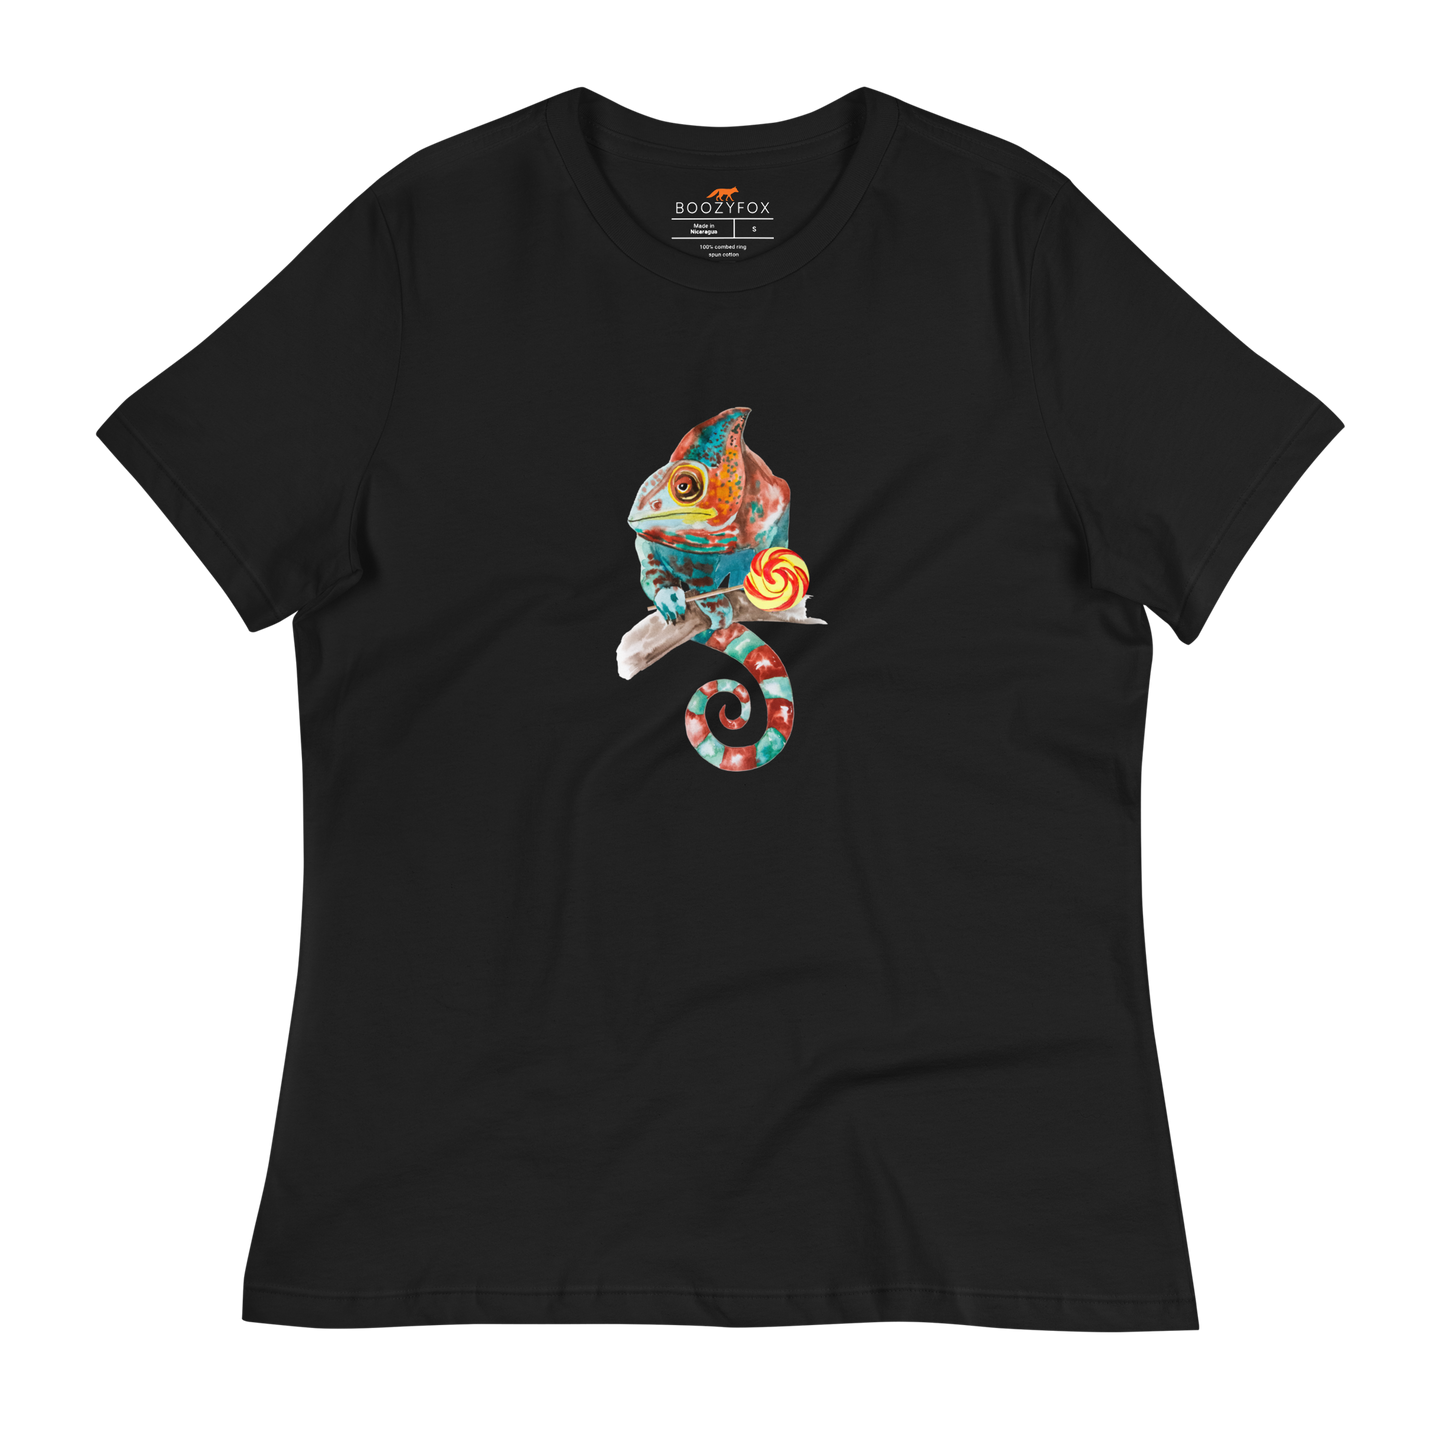 Women's relaxed black Chameleon t-shirt featuring a colorful Chameleon With A Lollipop graphic on the chest - Women's Graphic Chameleon Tees - Boozy Fox